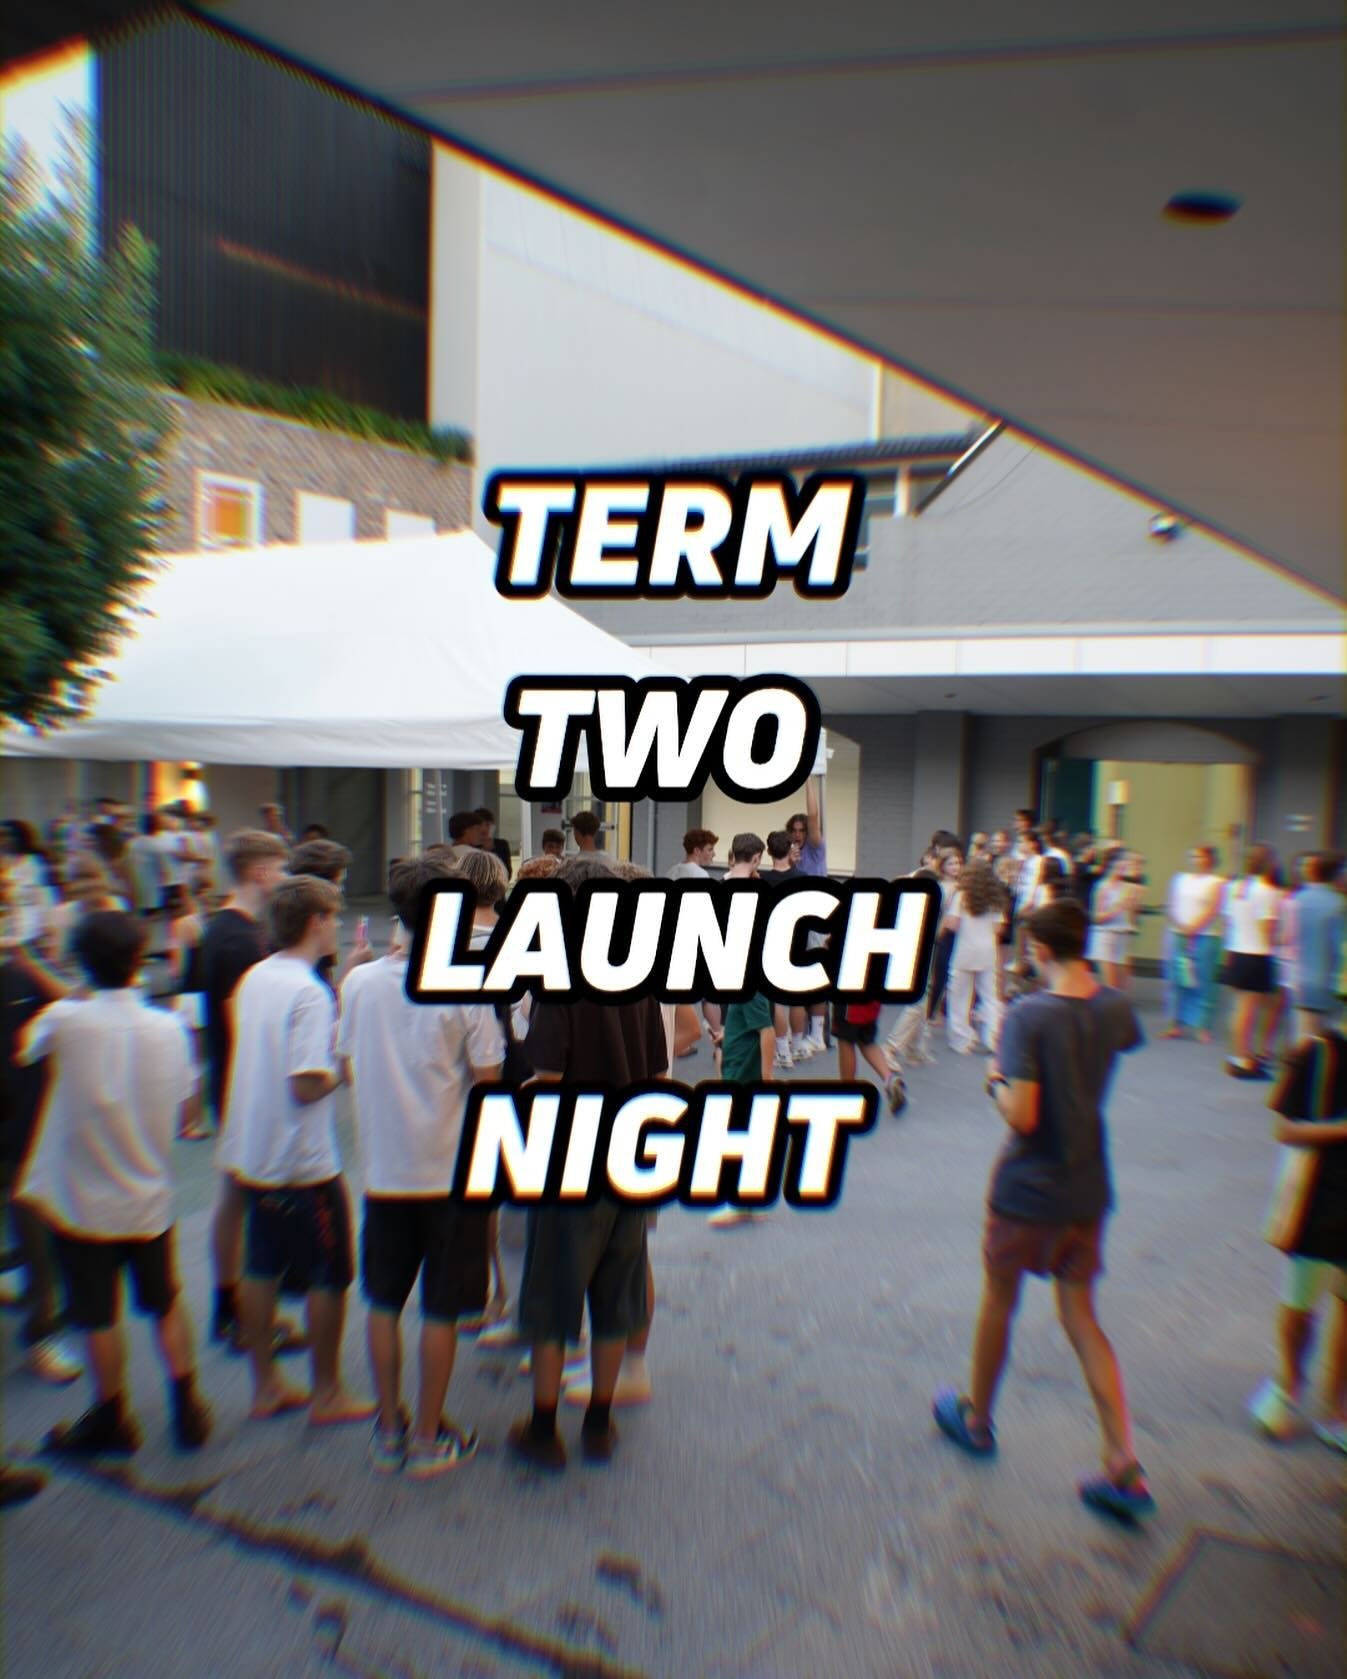 TERM 2 🚀
Friday
6:30-8:30pm
$5 for dinner
Cash, card, or pay online for the whole term (link in bio)